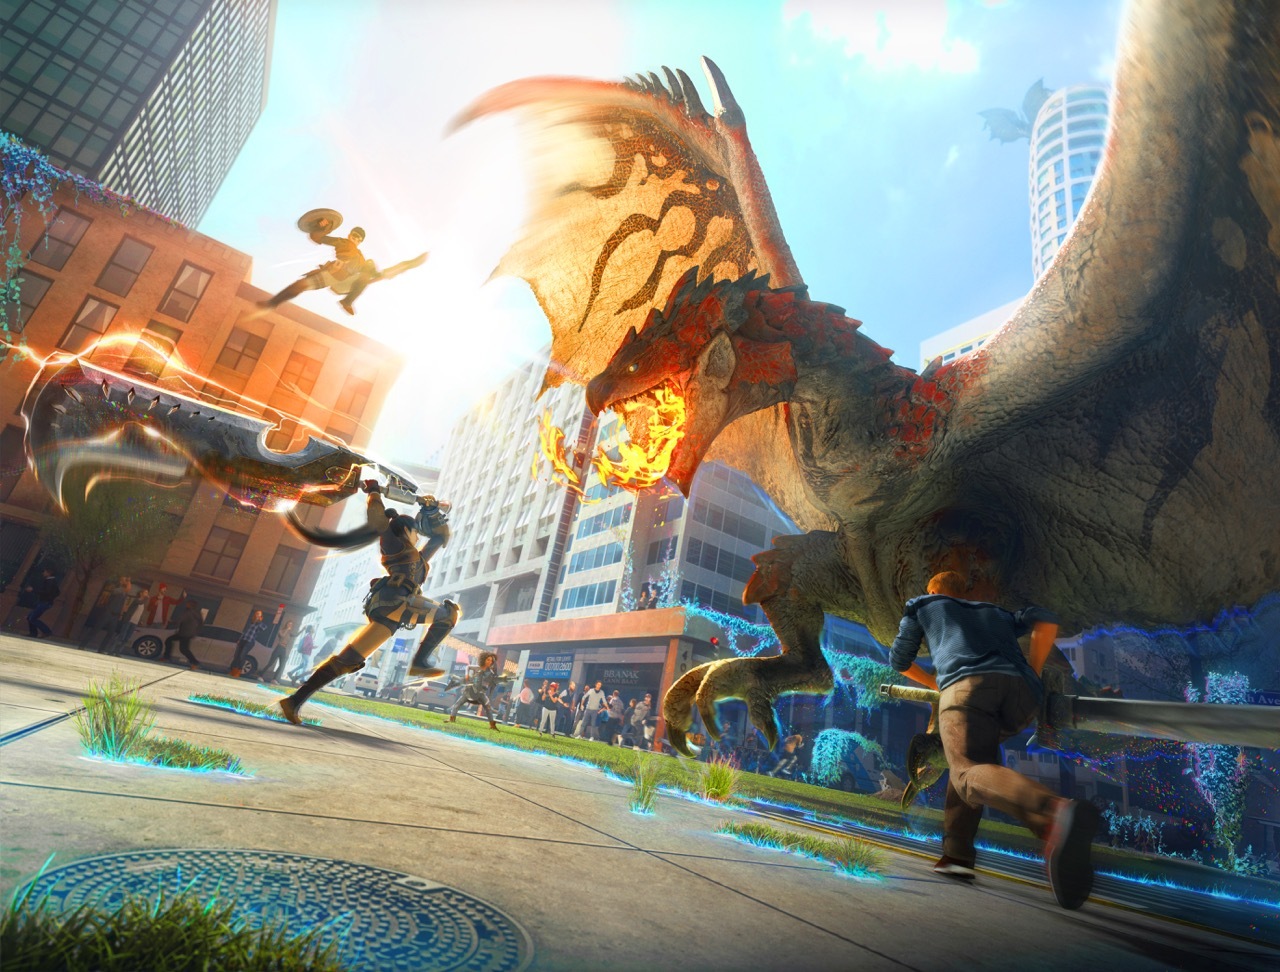 A piece of key art shows four players attacking a fire-breathing monster